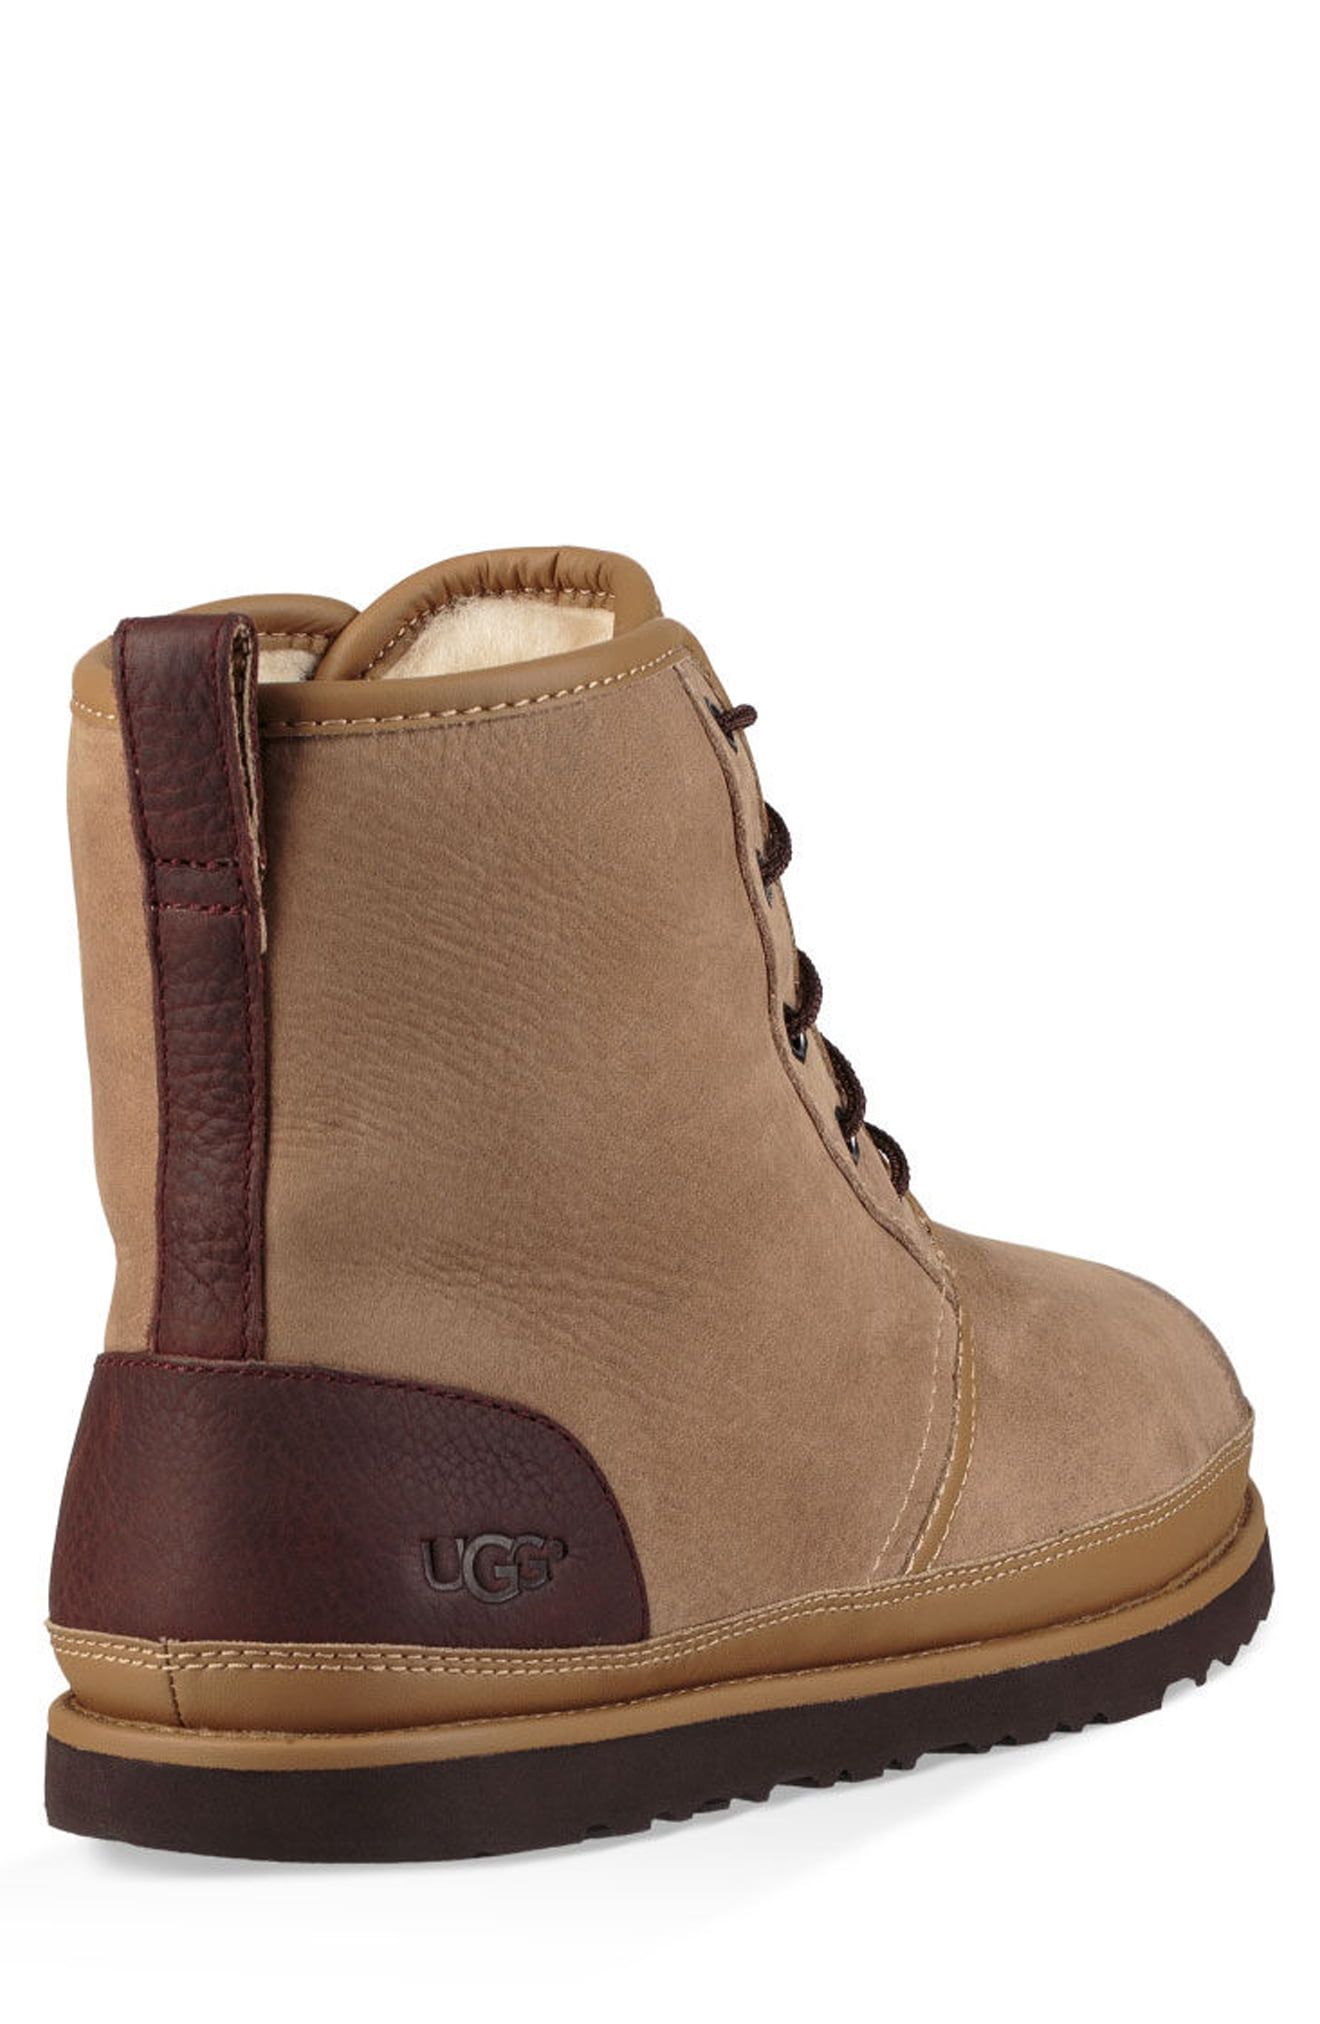 Men's UGG all-weather boots are under 